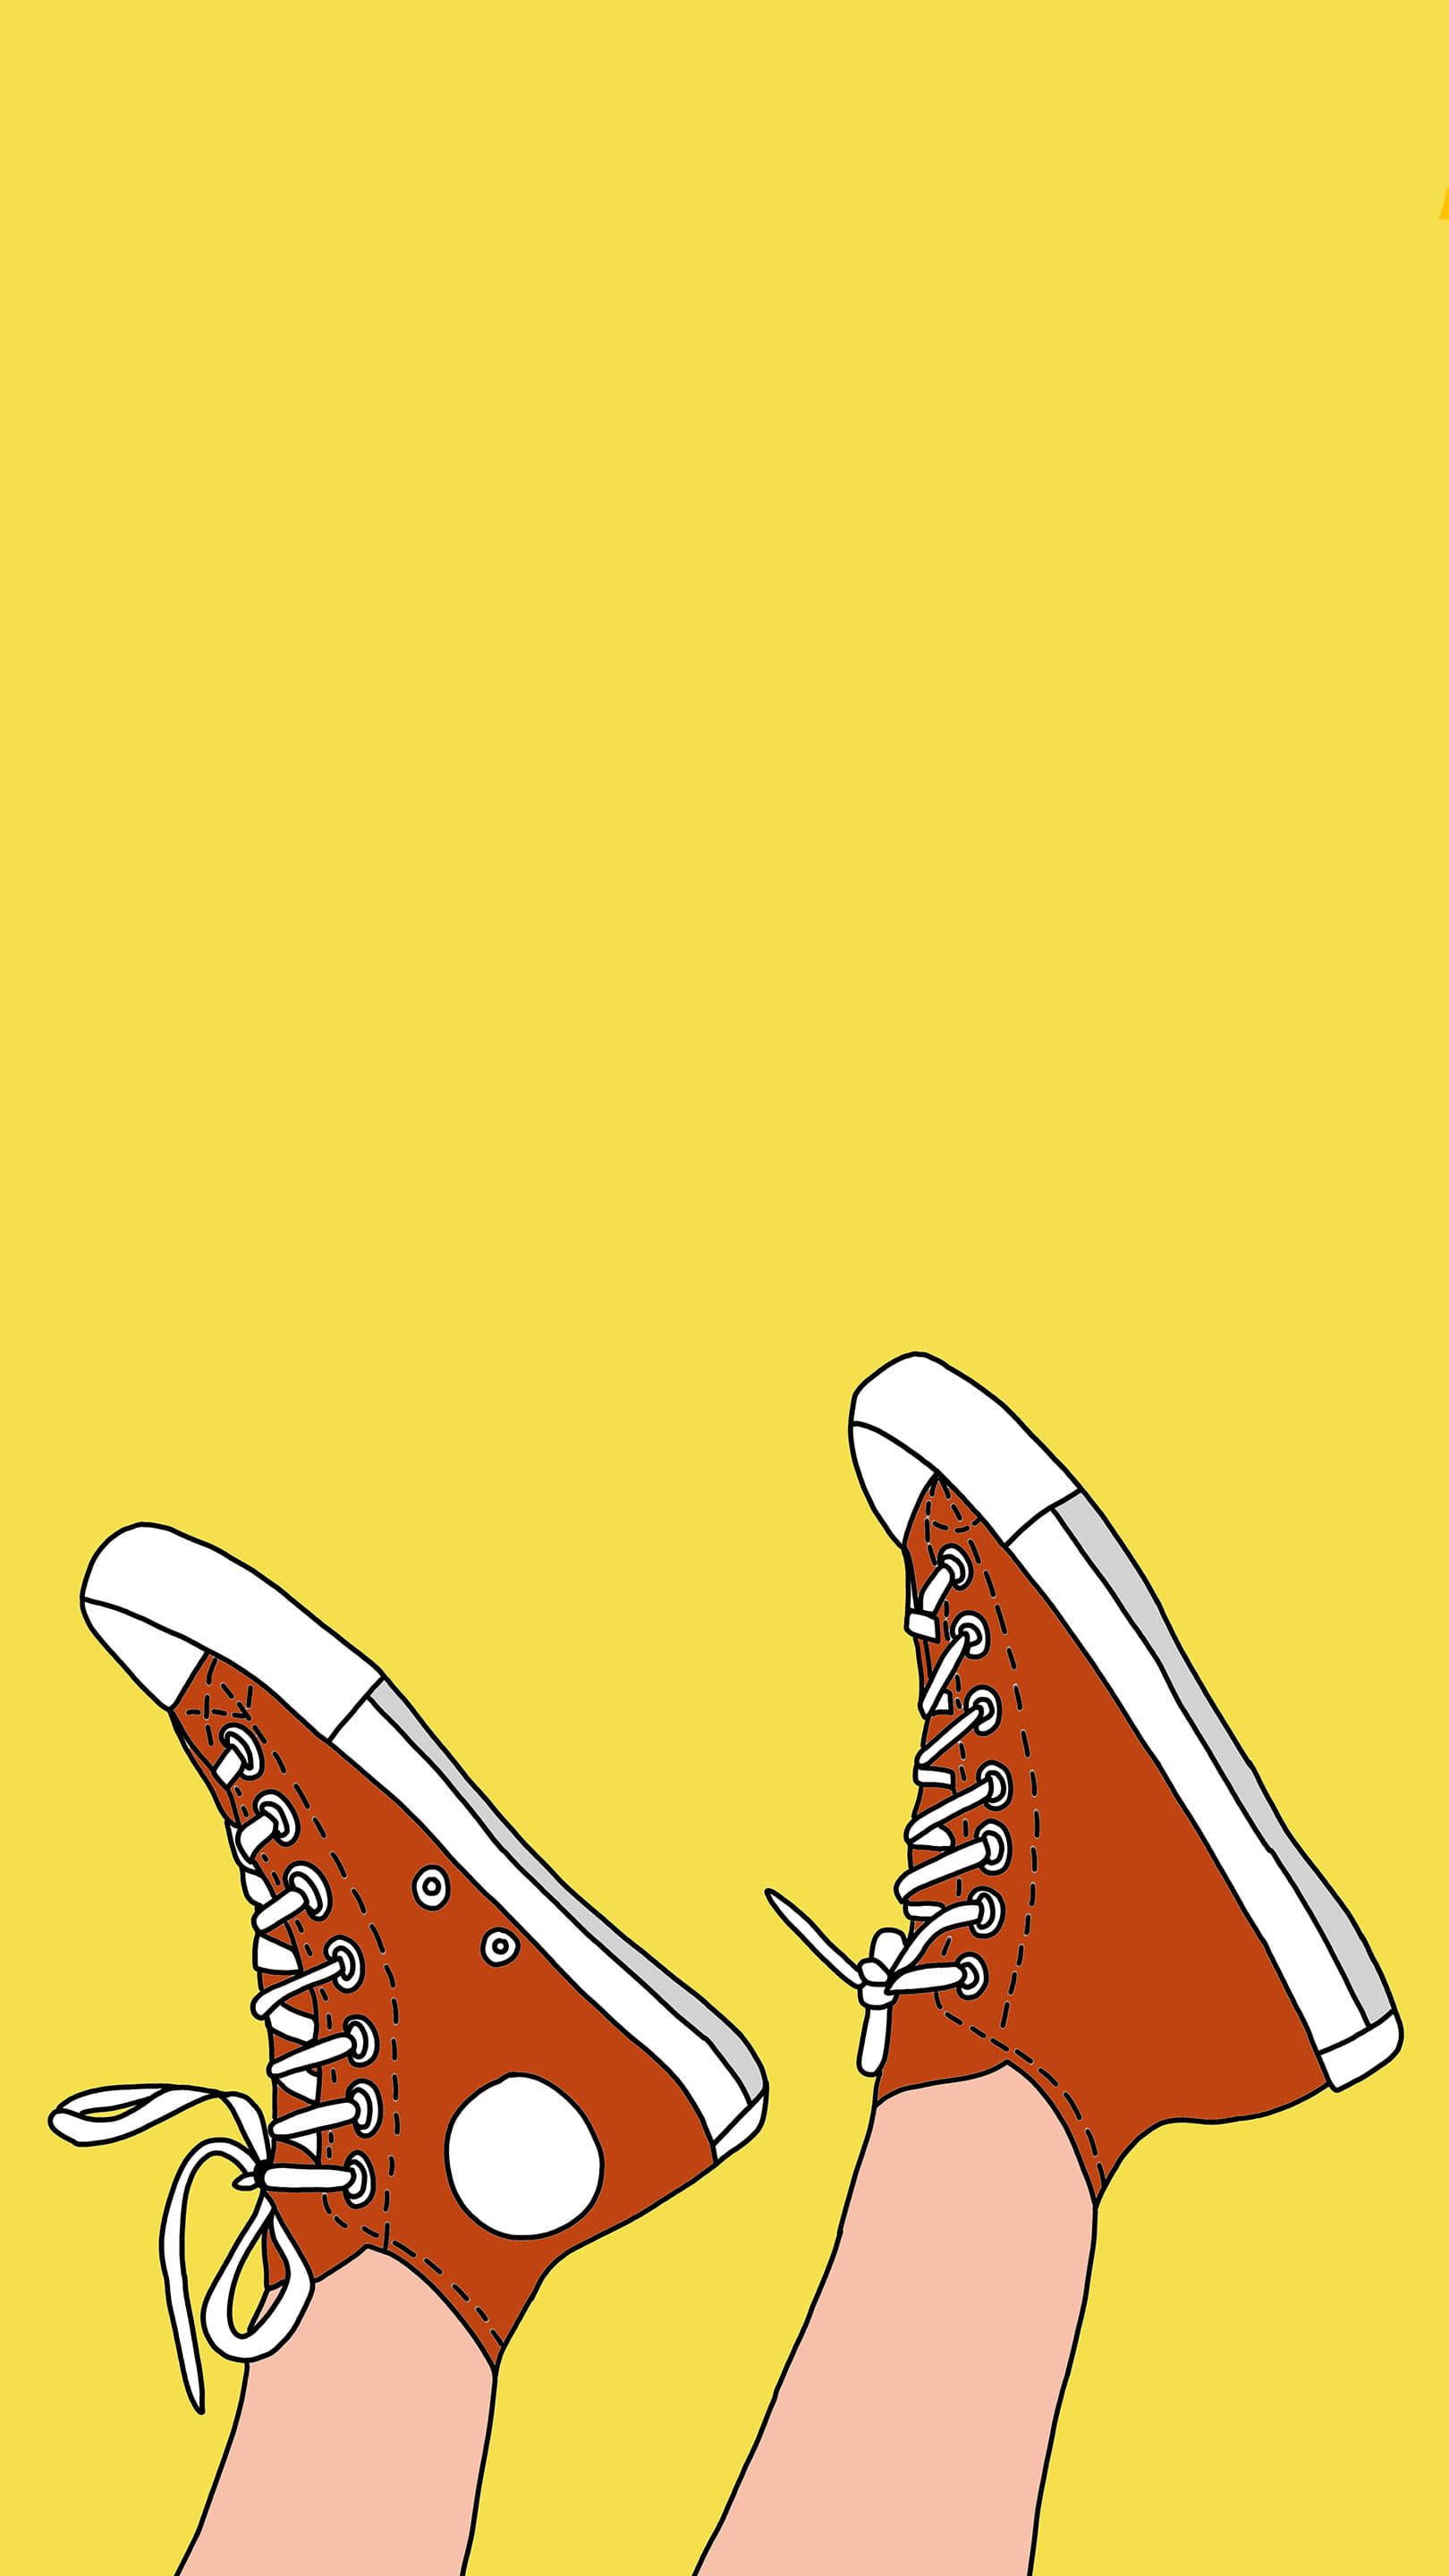 An illustration of a person's legs wearing red converse sneakers on a yellow background - Retro